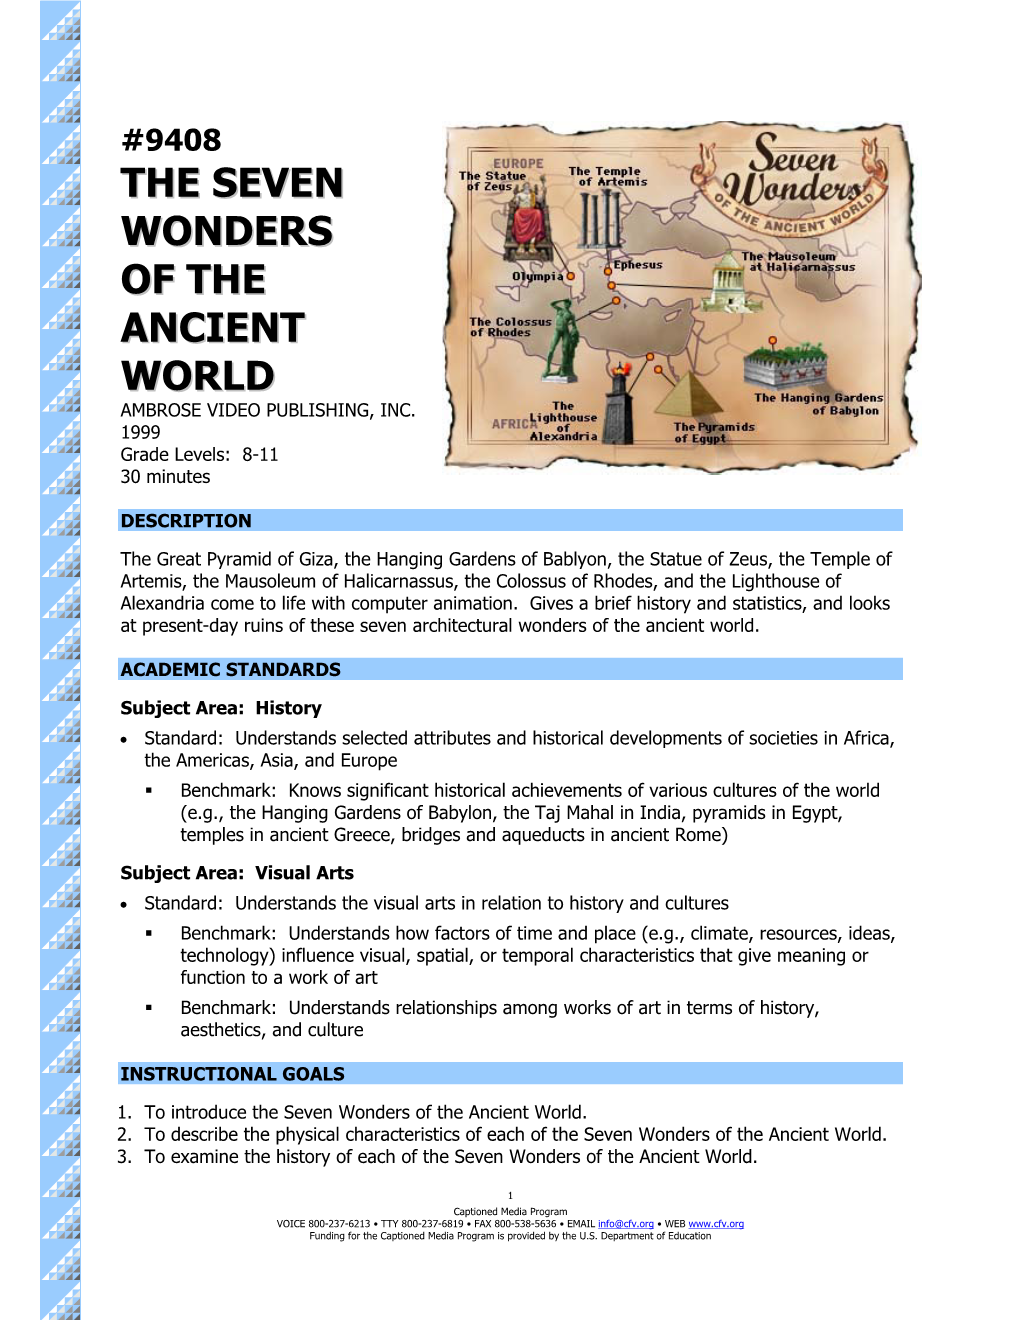 9408 the Seven Wonders of the Ancient World